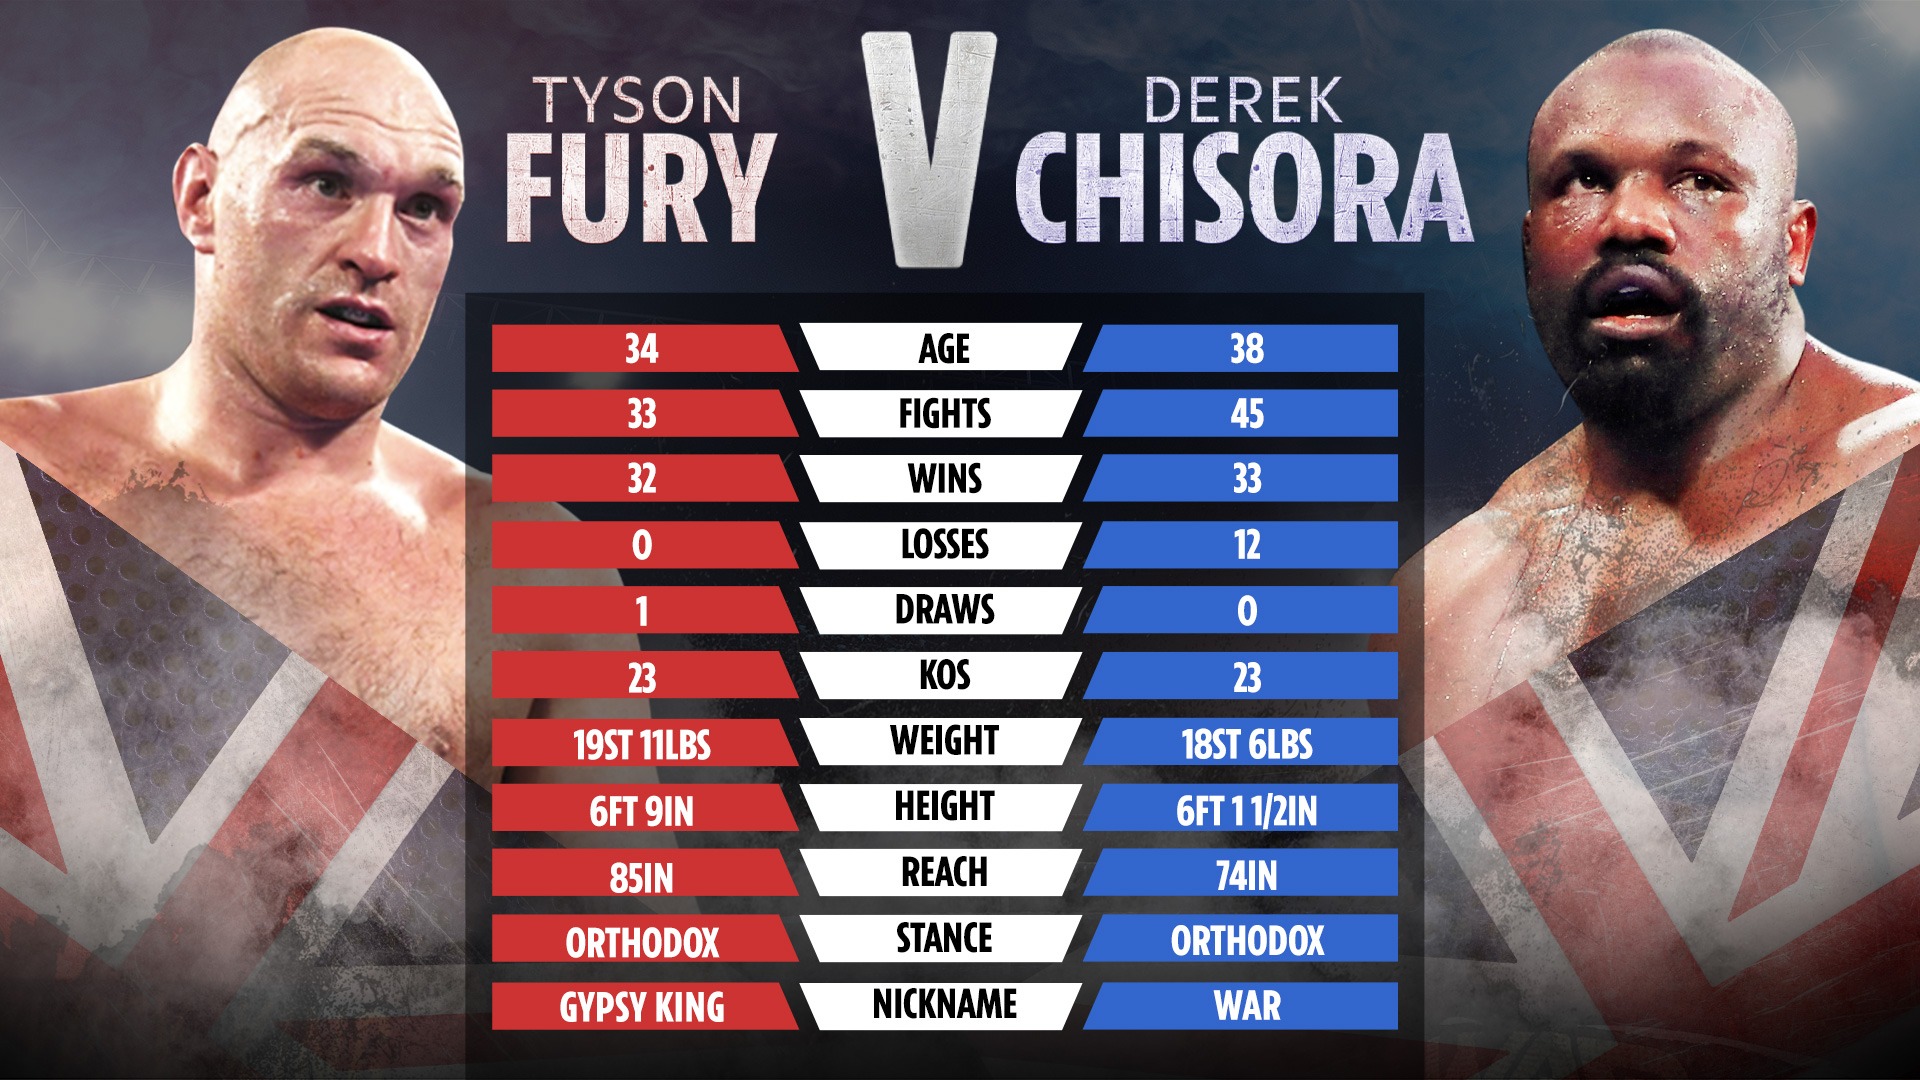 , Tyson Fury vs Derek Chisora EXACT walk out time – what are the ring walk times confirmed for TONIGHT?